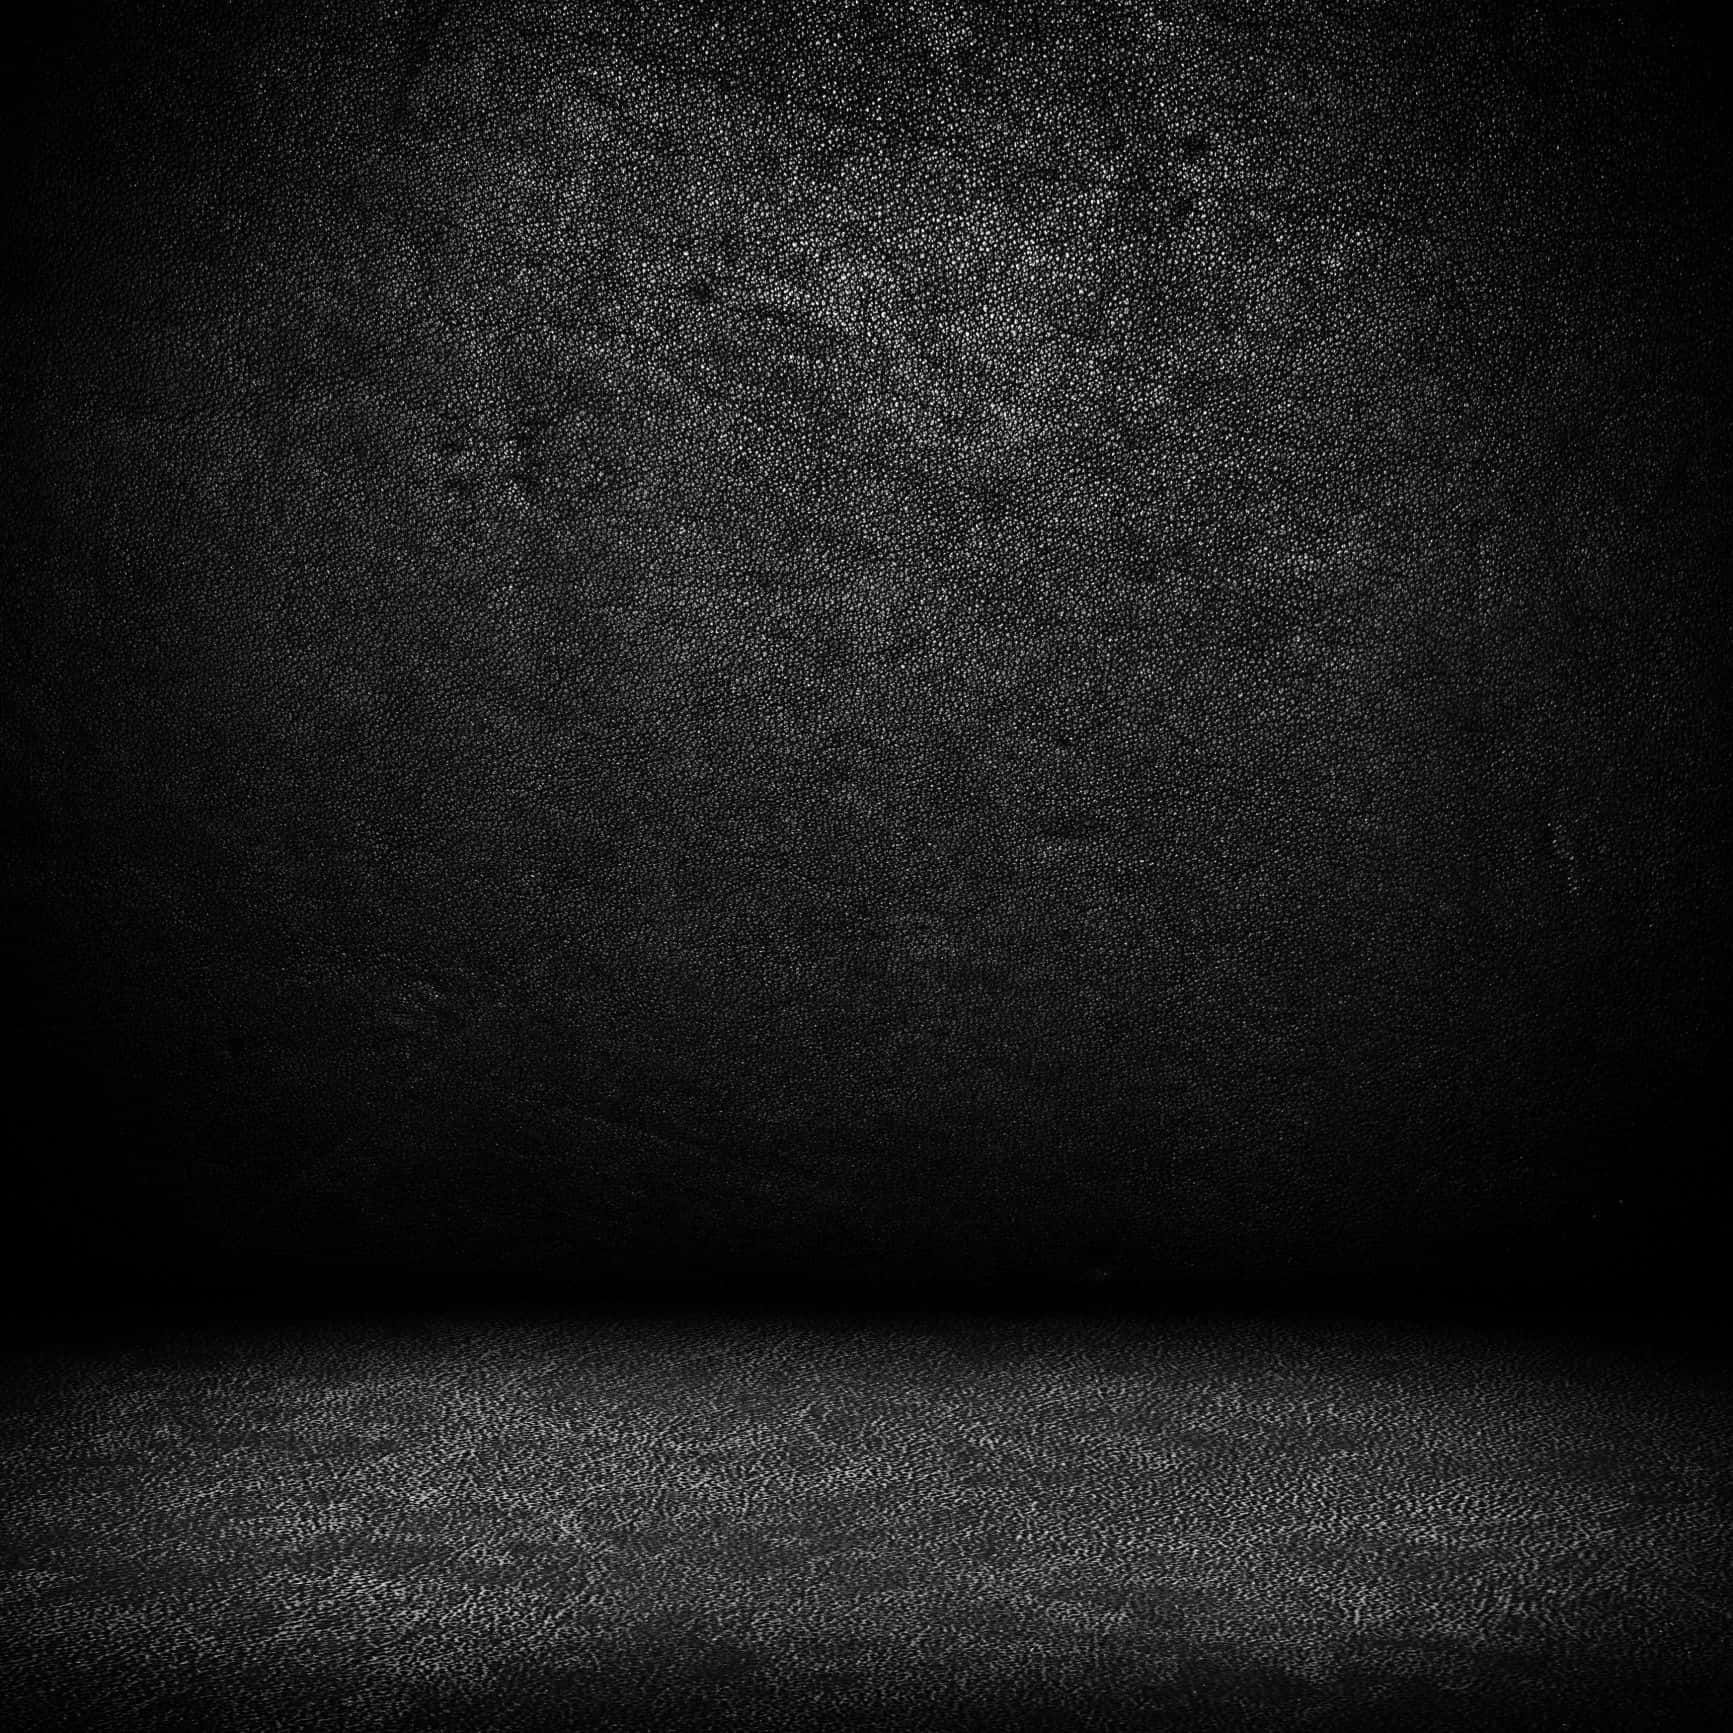 Mysterious Dark Wall Background